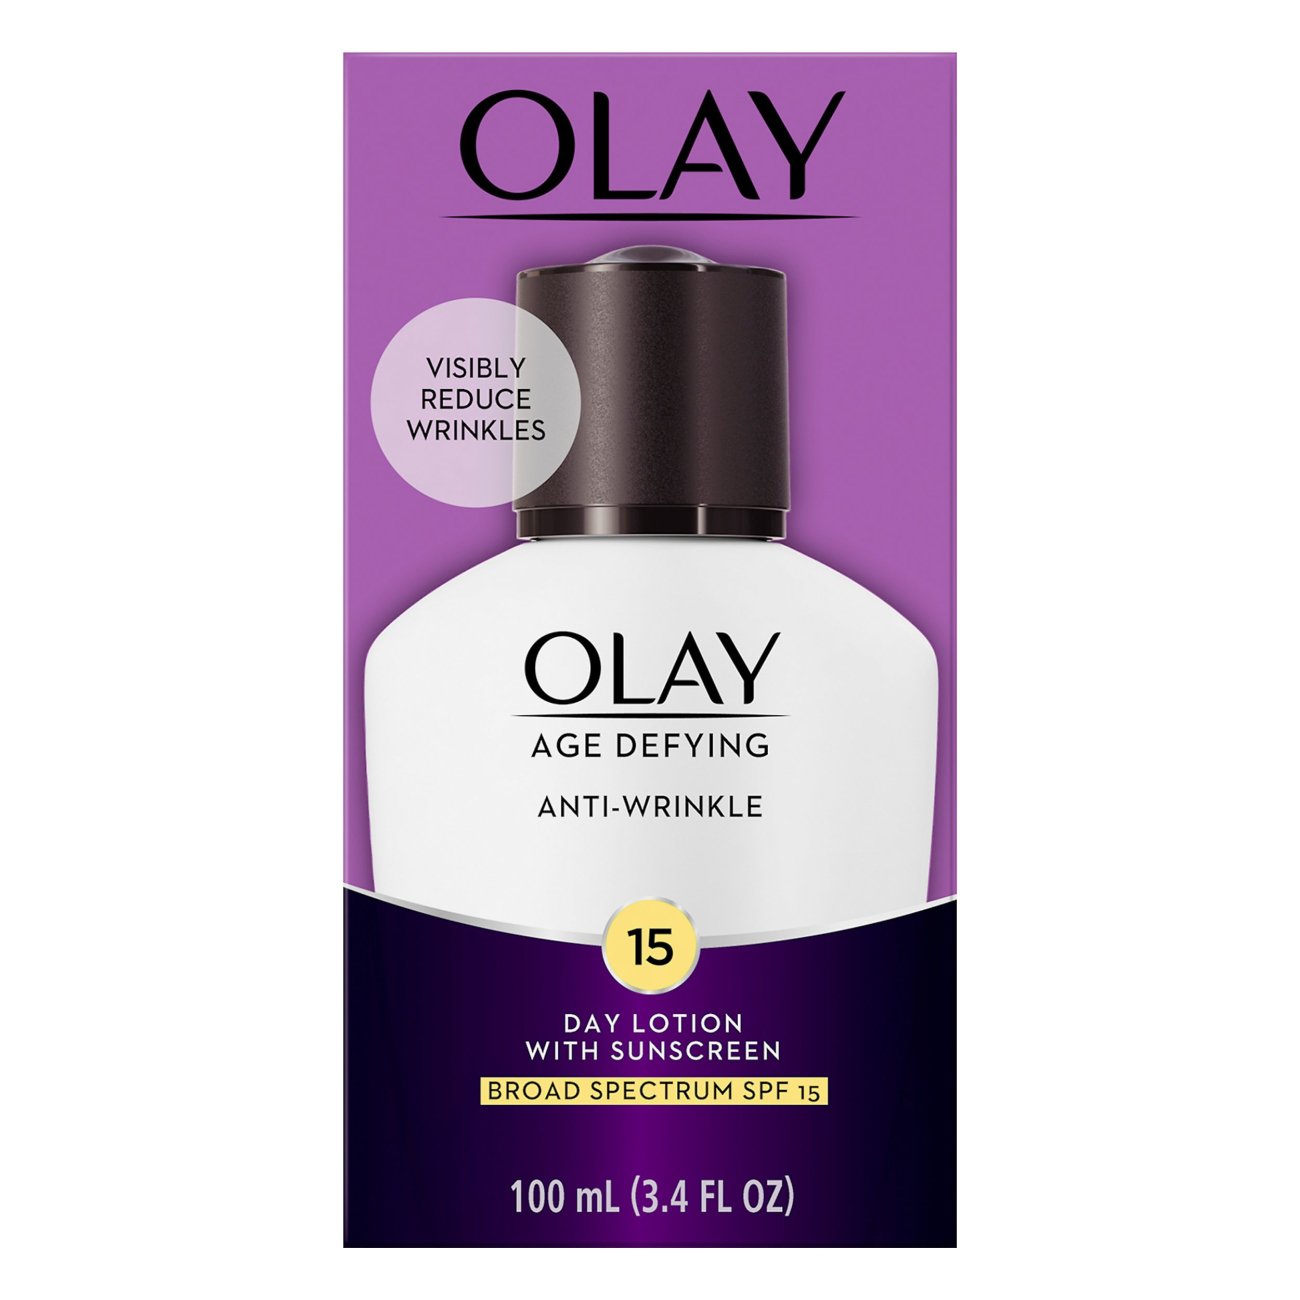 Olay Total Effects 7 In 1 Fragrance-Free Face Moisturizer - Shop Facial  Moisturizer at H-E-B